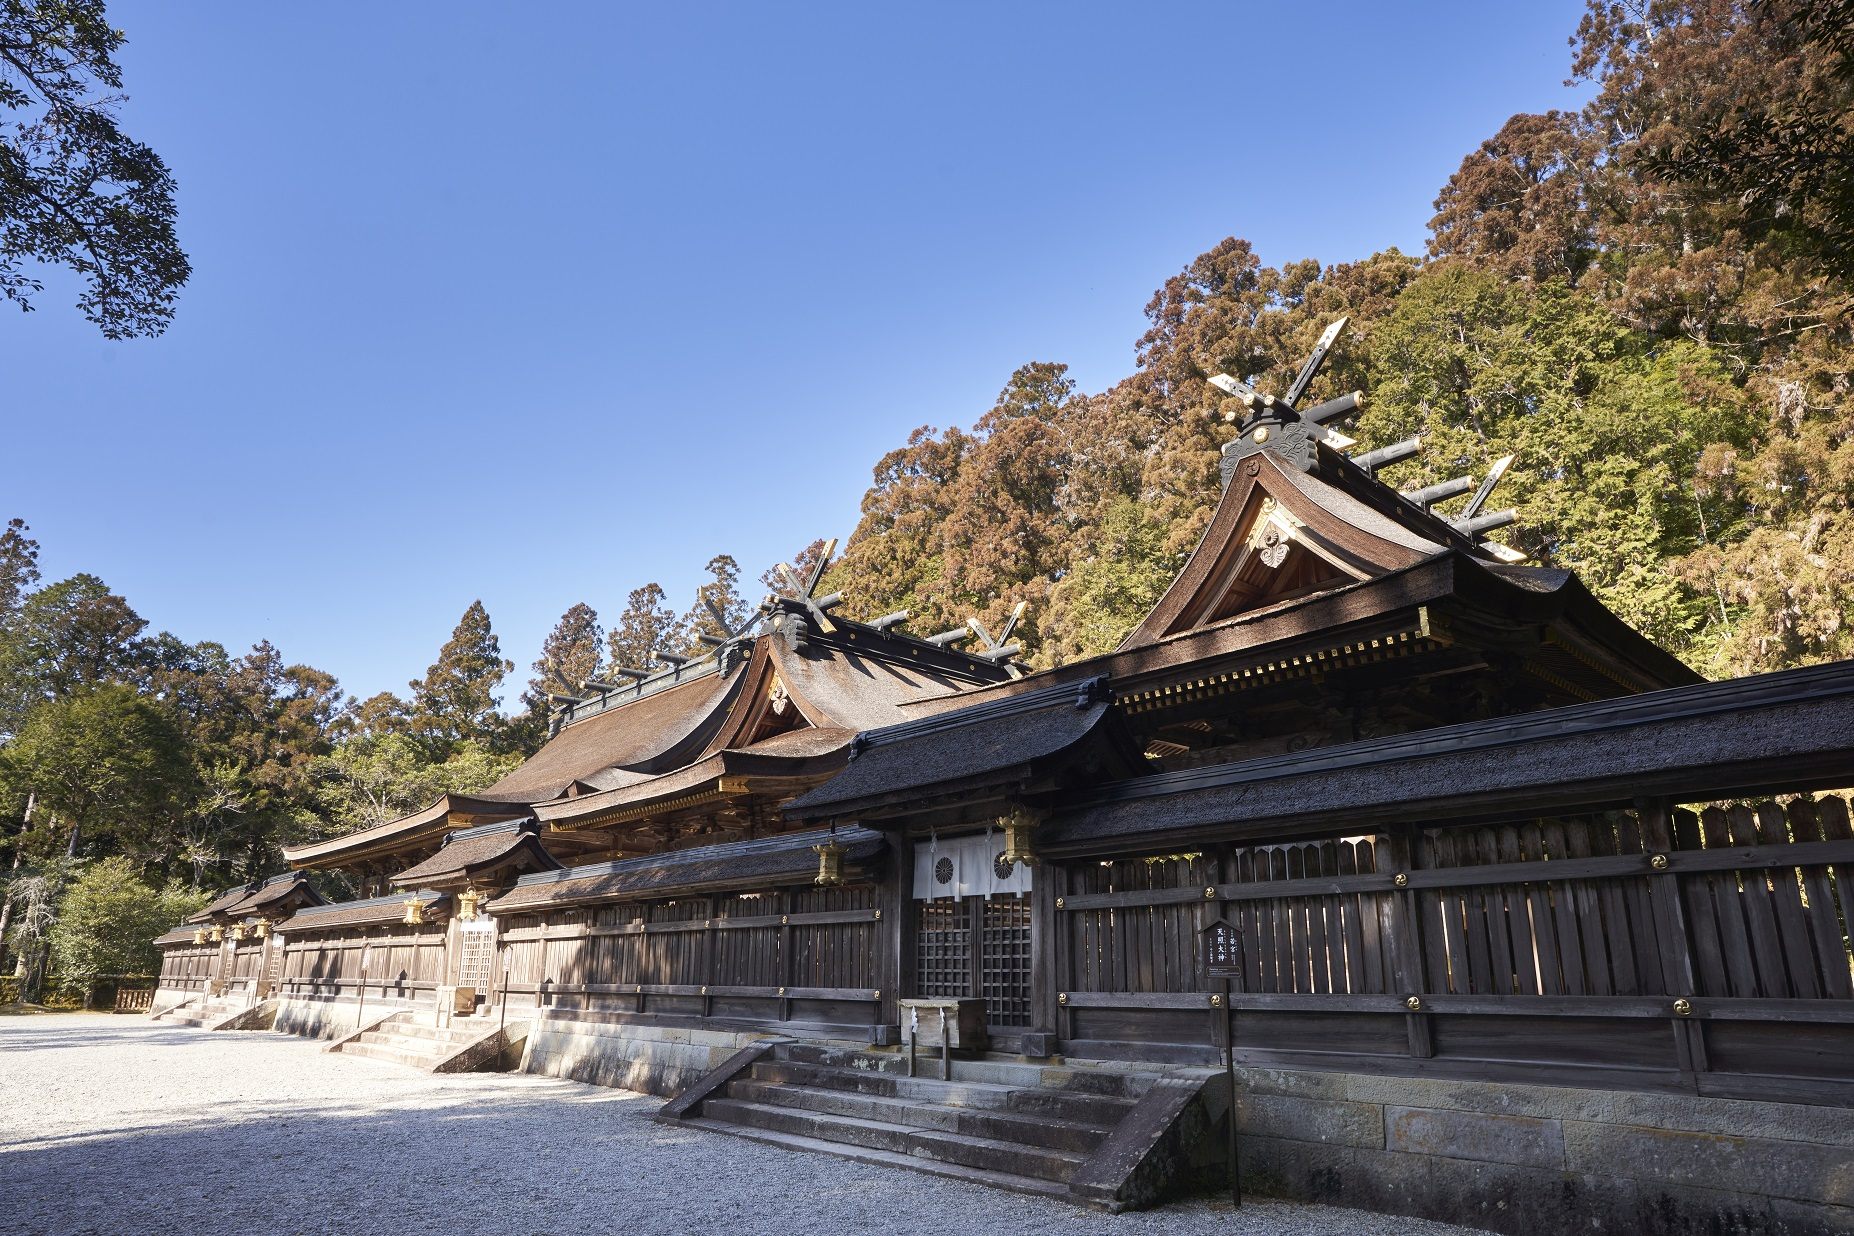 Shaden (shrine buildings) stand in a row with the forest behind them. In the middle is the third shaden, the Shojo-den.